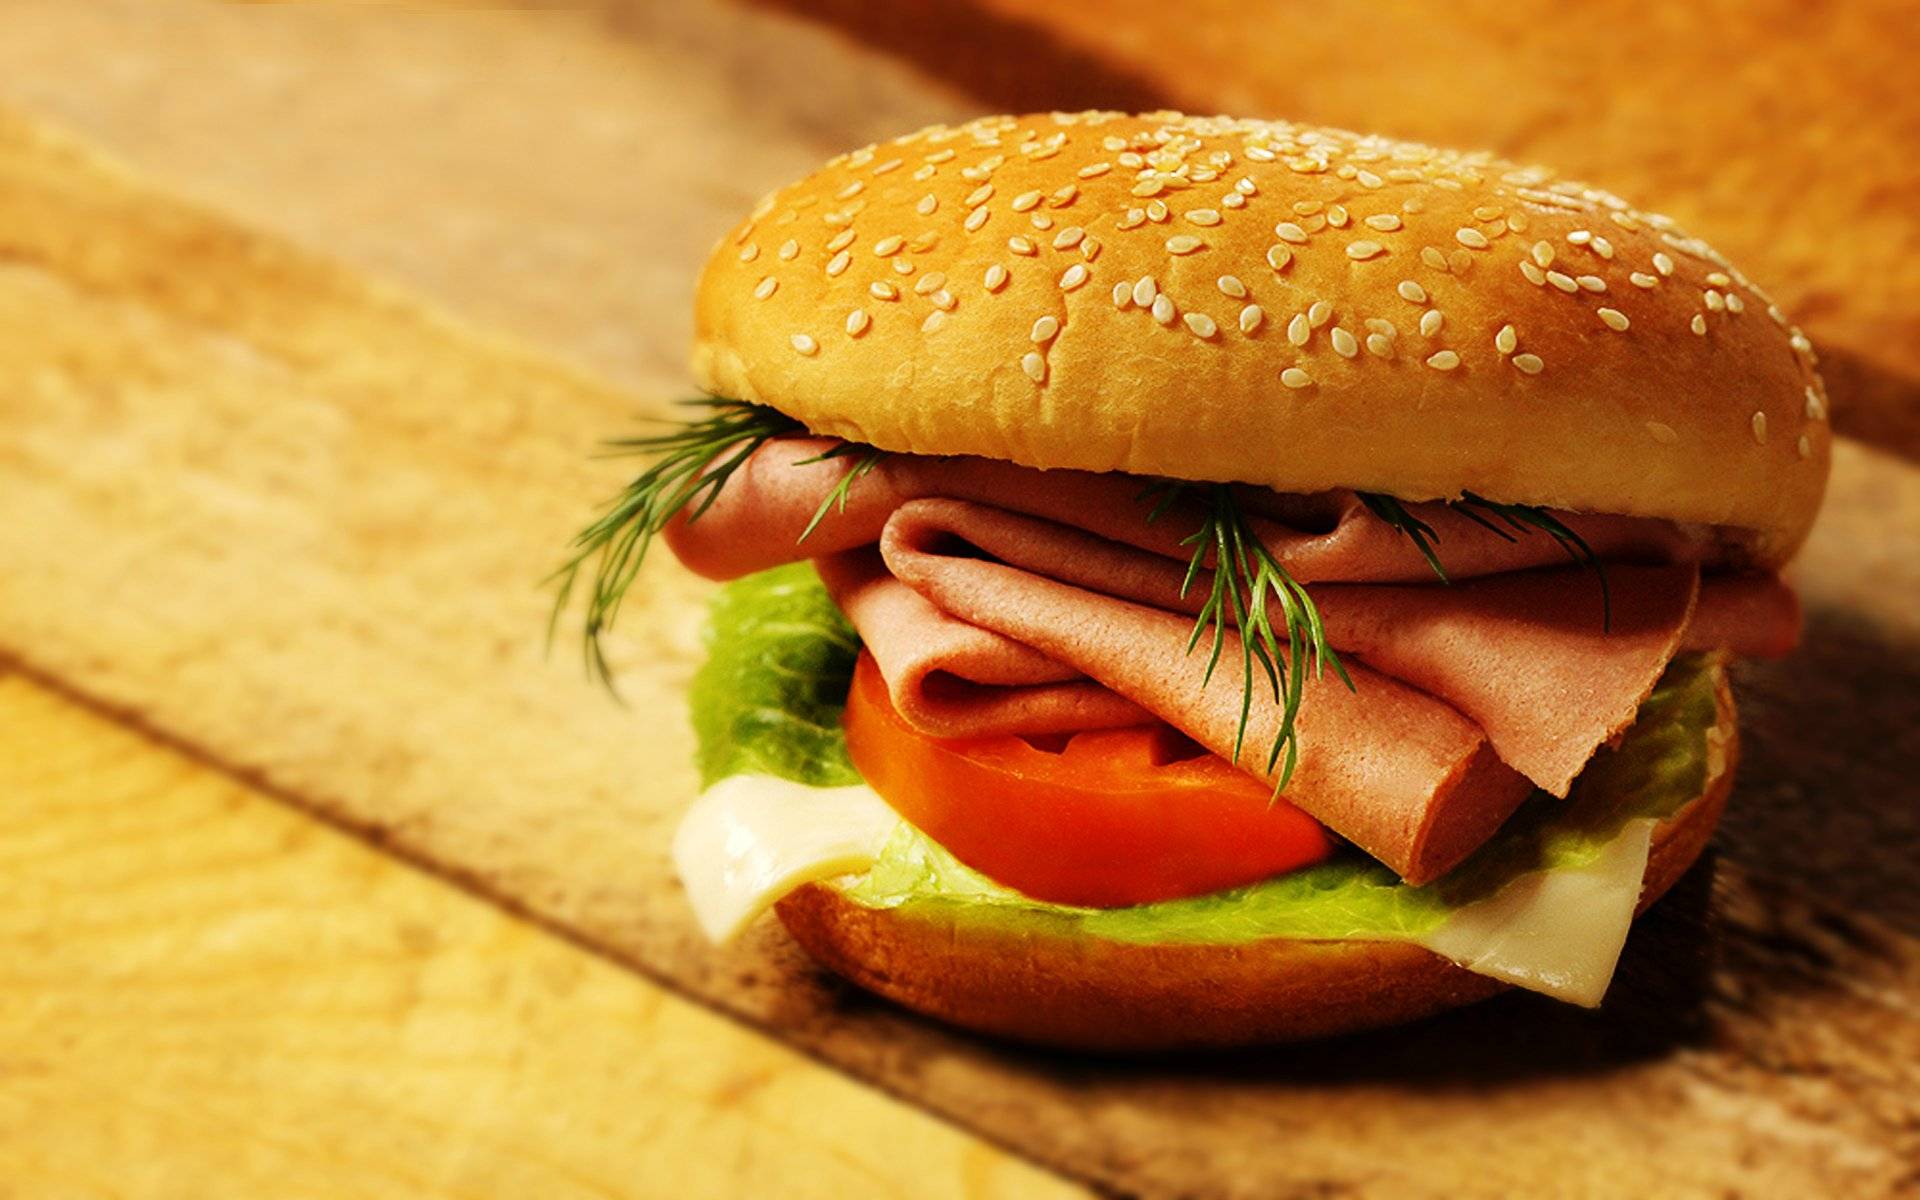  Sandwich HQ Background Wallpapers